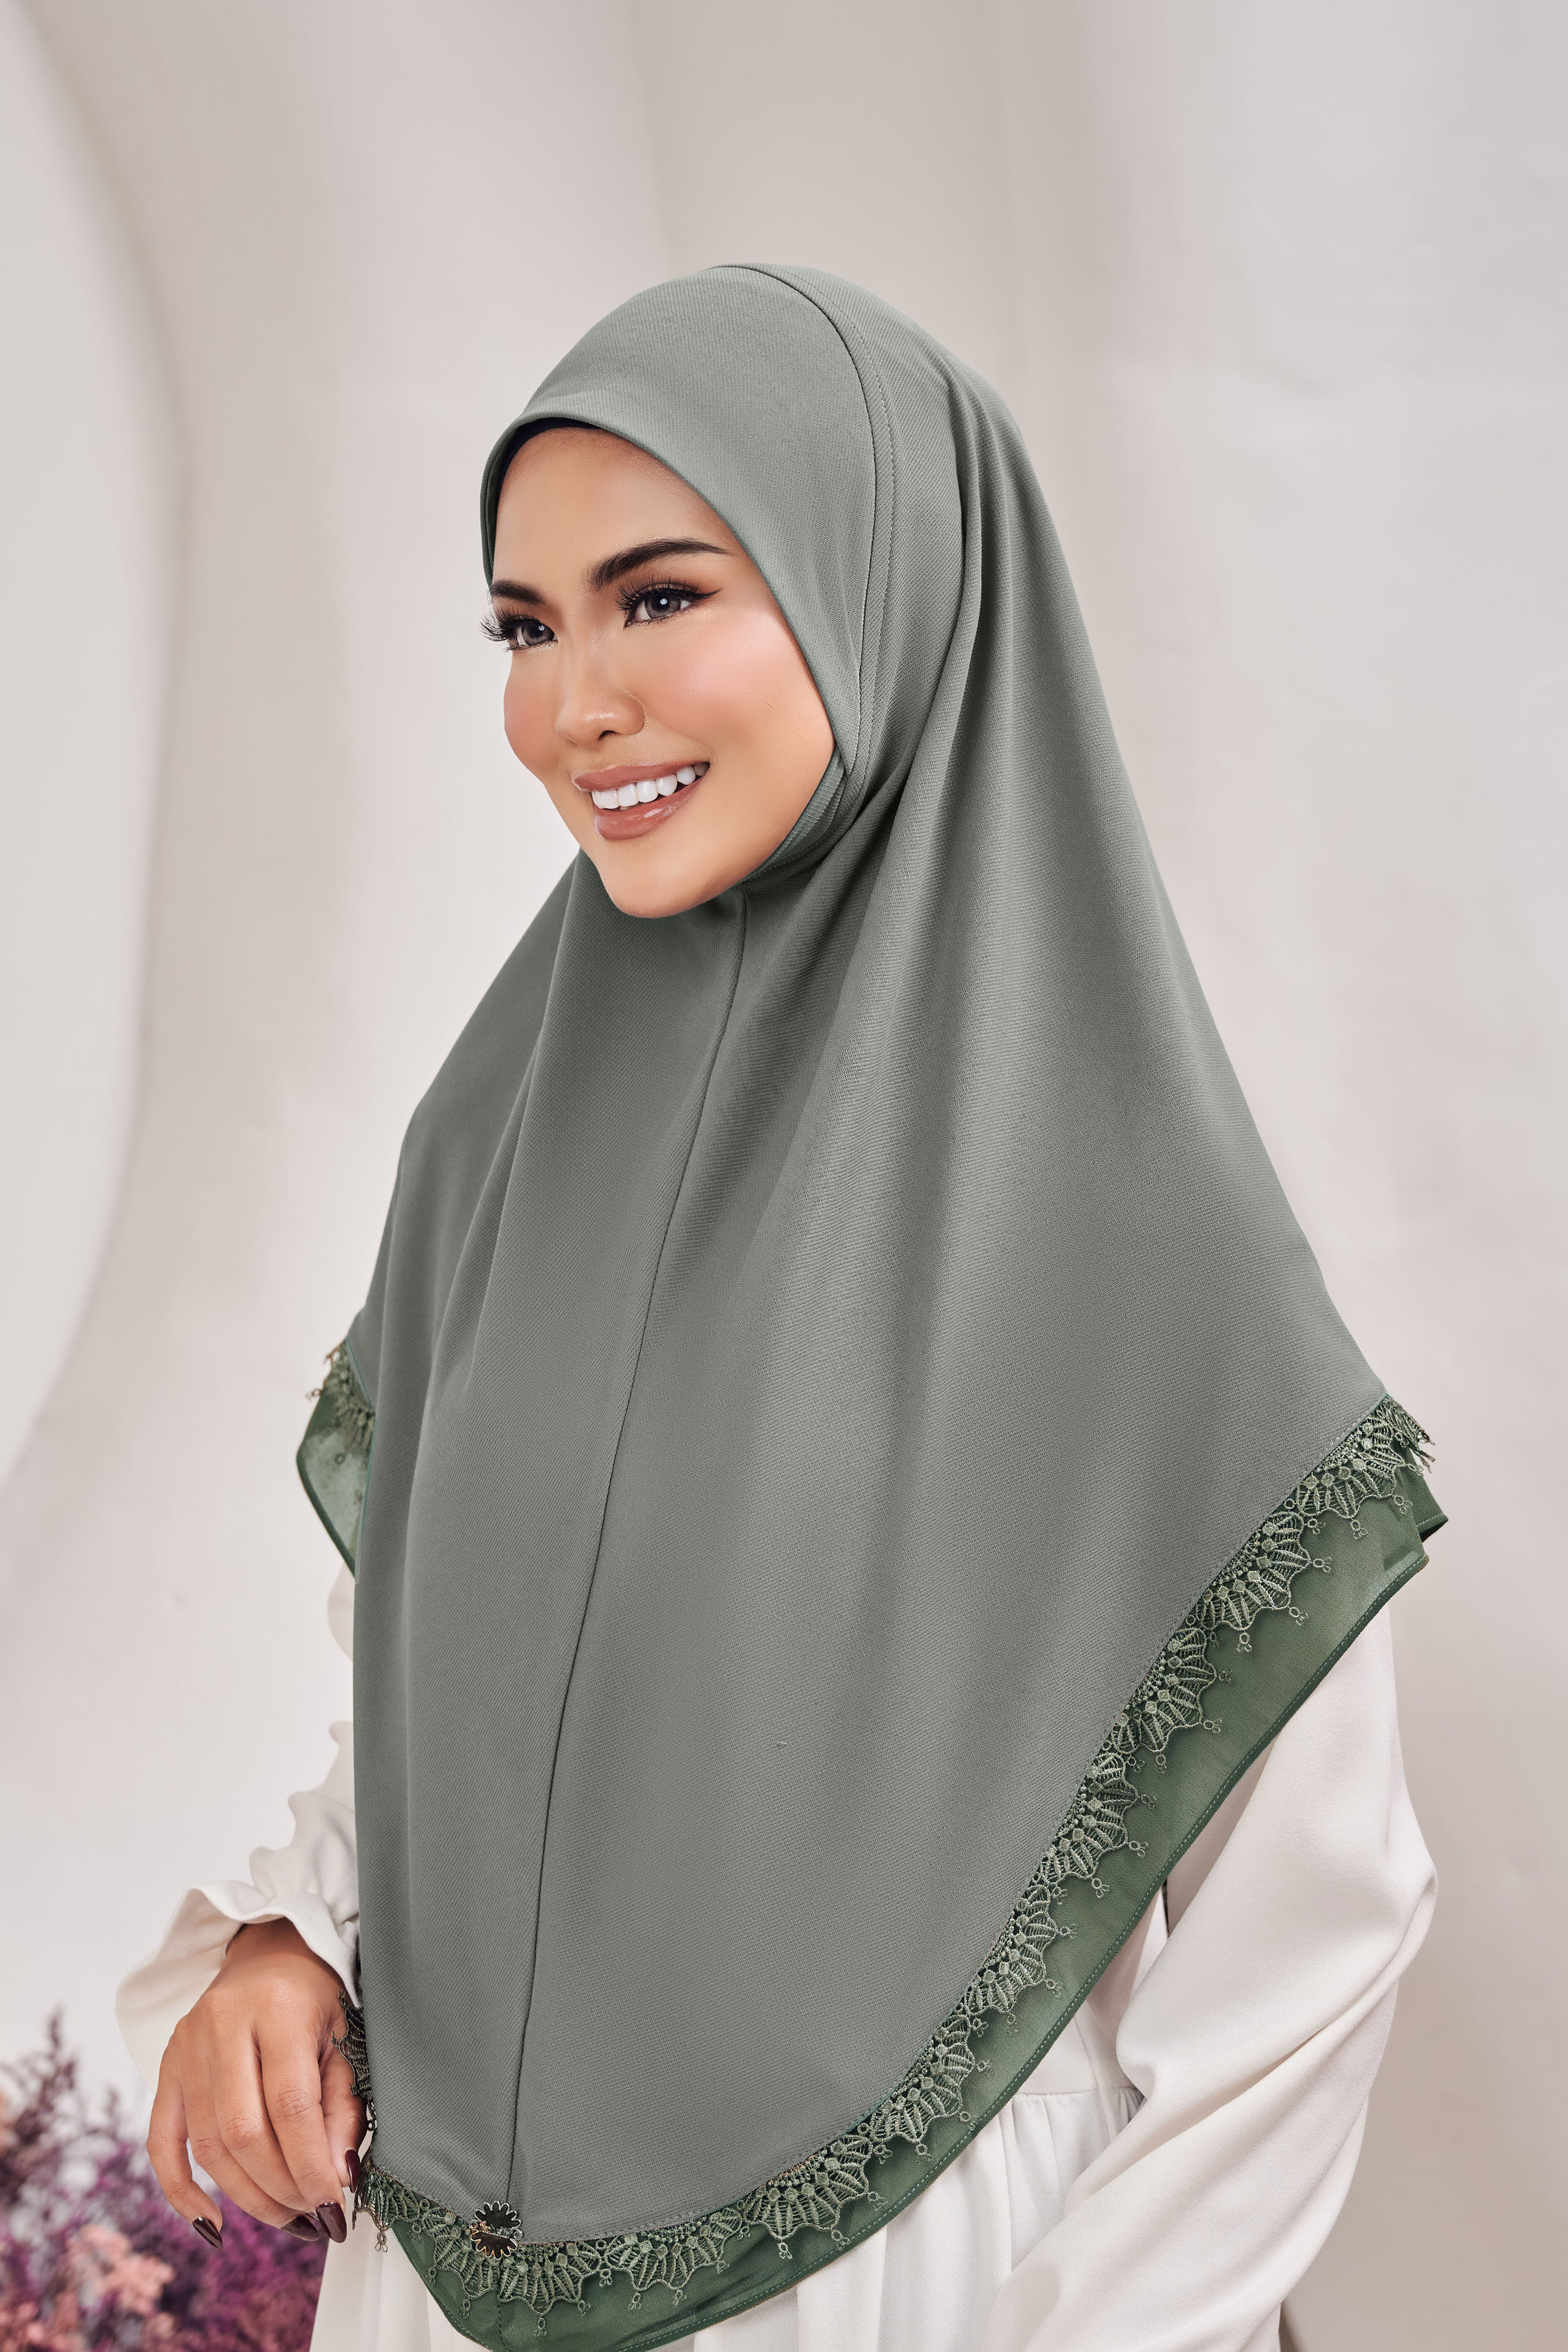 (AS-IS) Indah Tudung Sarung in Dusty Green